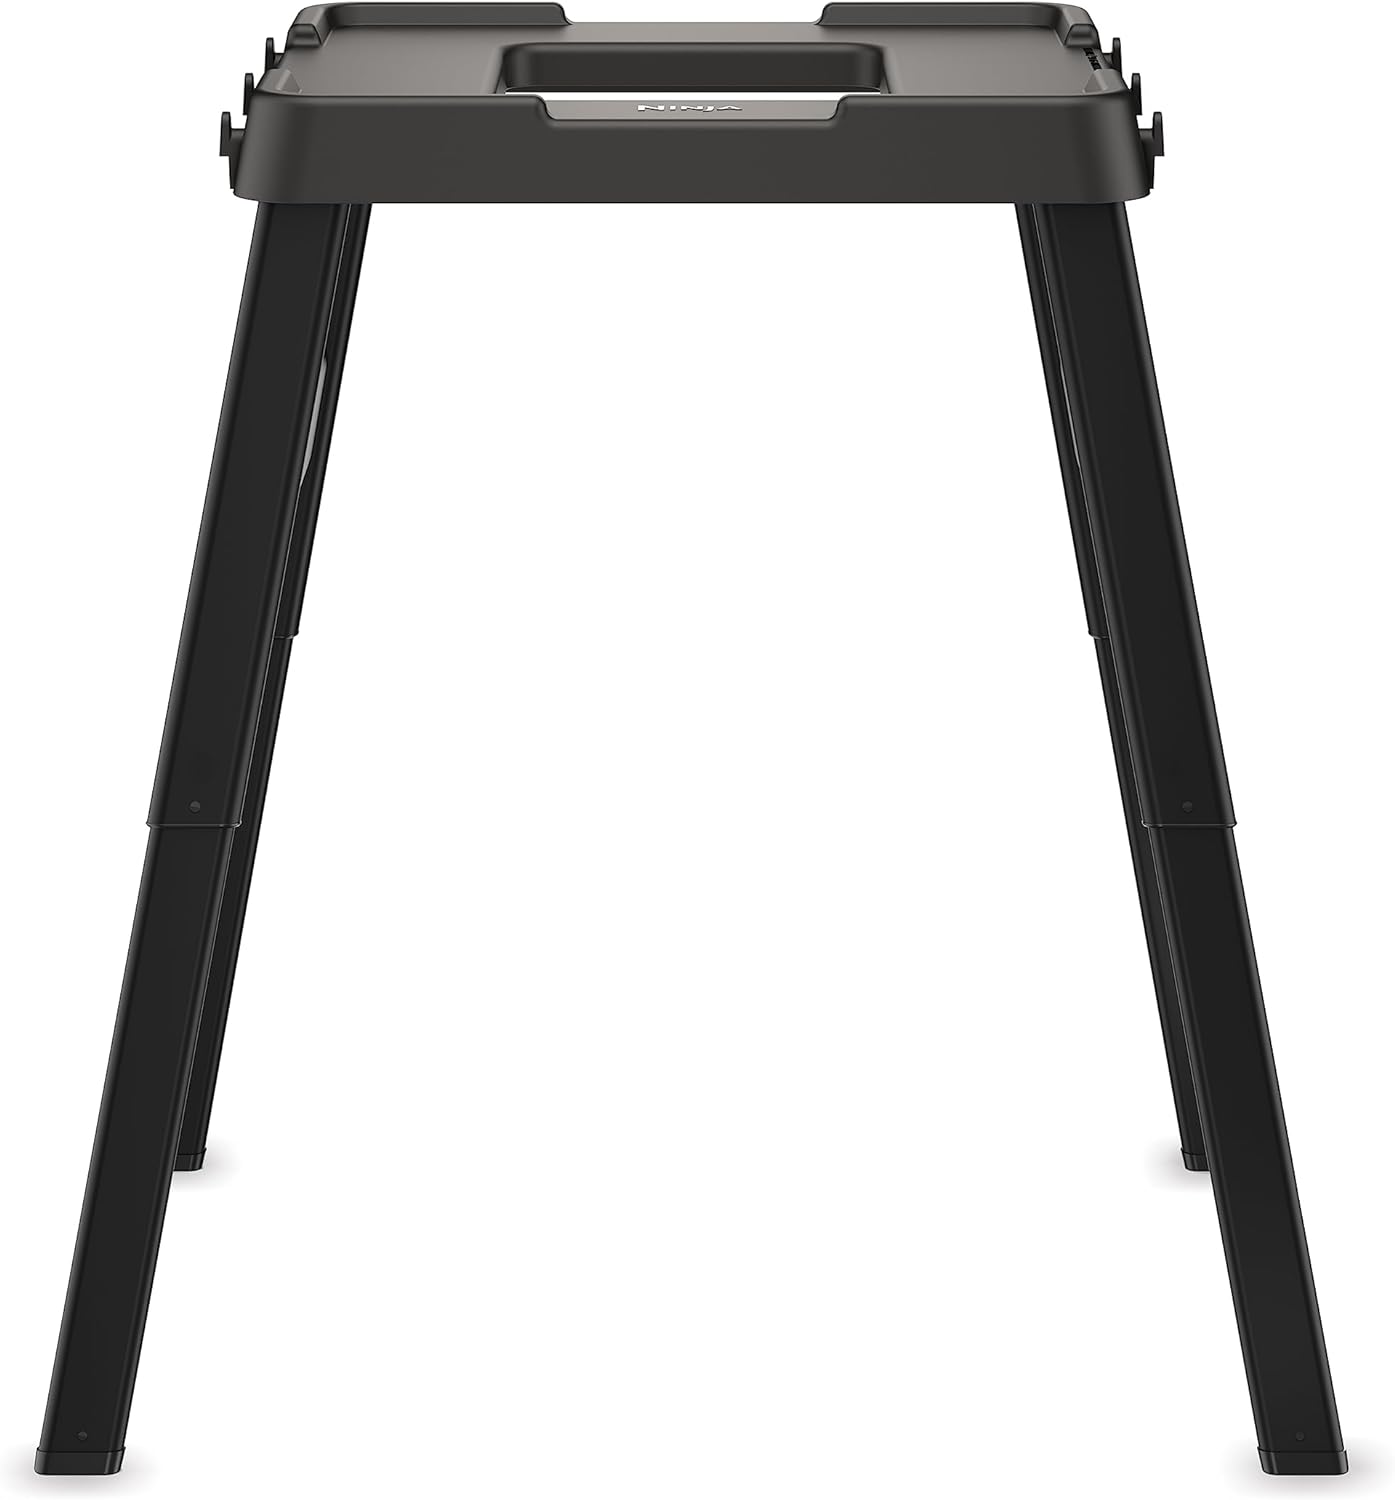 Ninja XSKUNSTAND Outdoor Stand, Woodfire Products, Adjustable Height, Utensil-Holder, Side Table-Compatible, Weather-Resistant, Black, 26 x 34 x 34